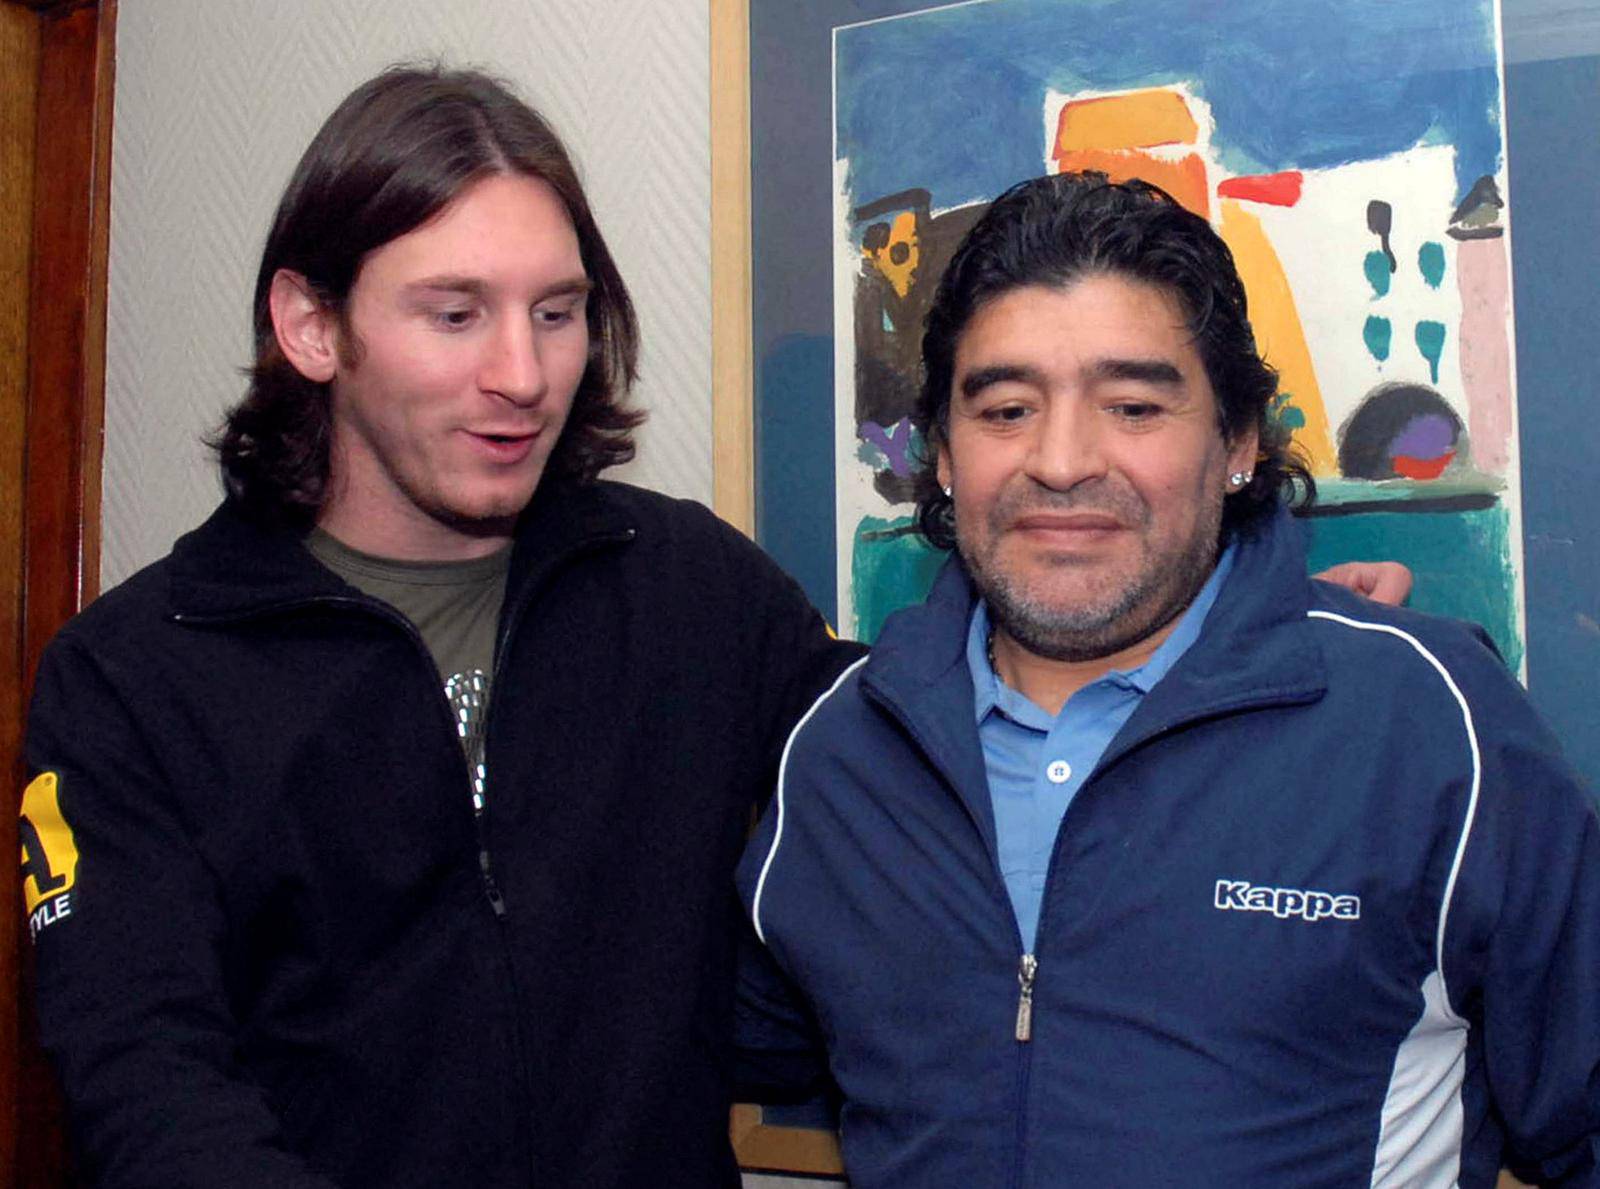 FILE PHOTO: Argentine soccer player Messi meets former soccer star Maradona in Rosario